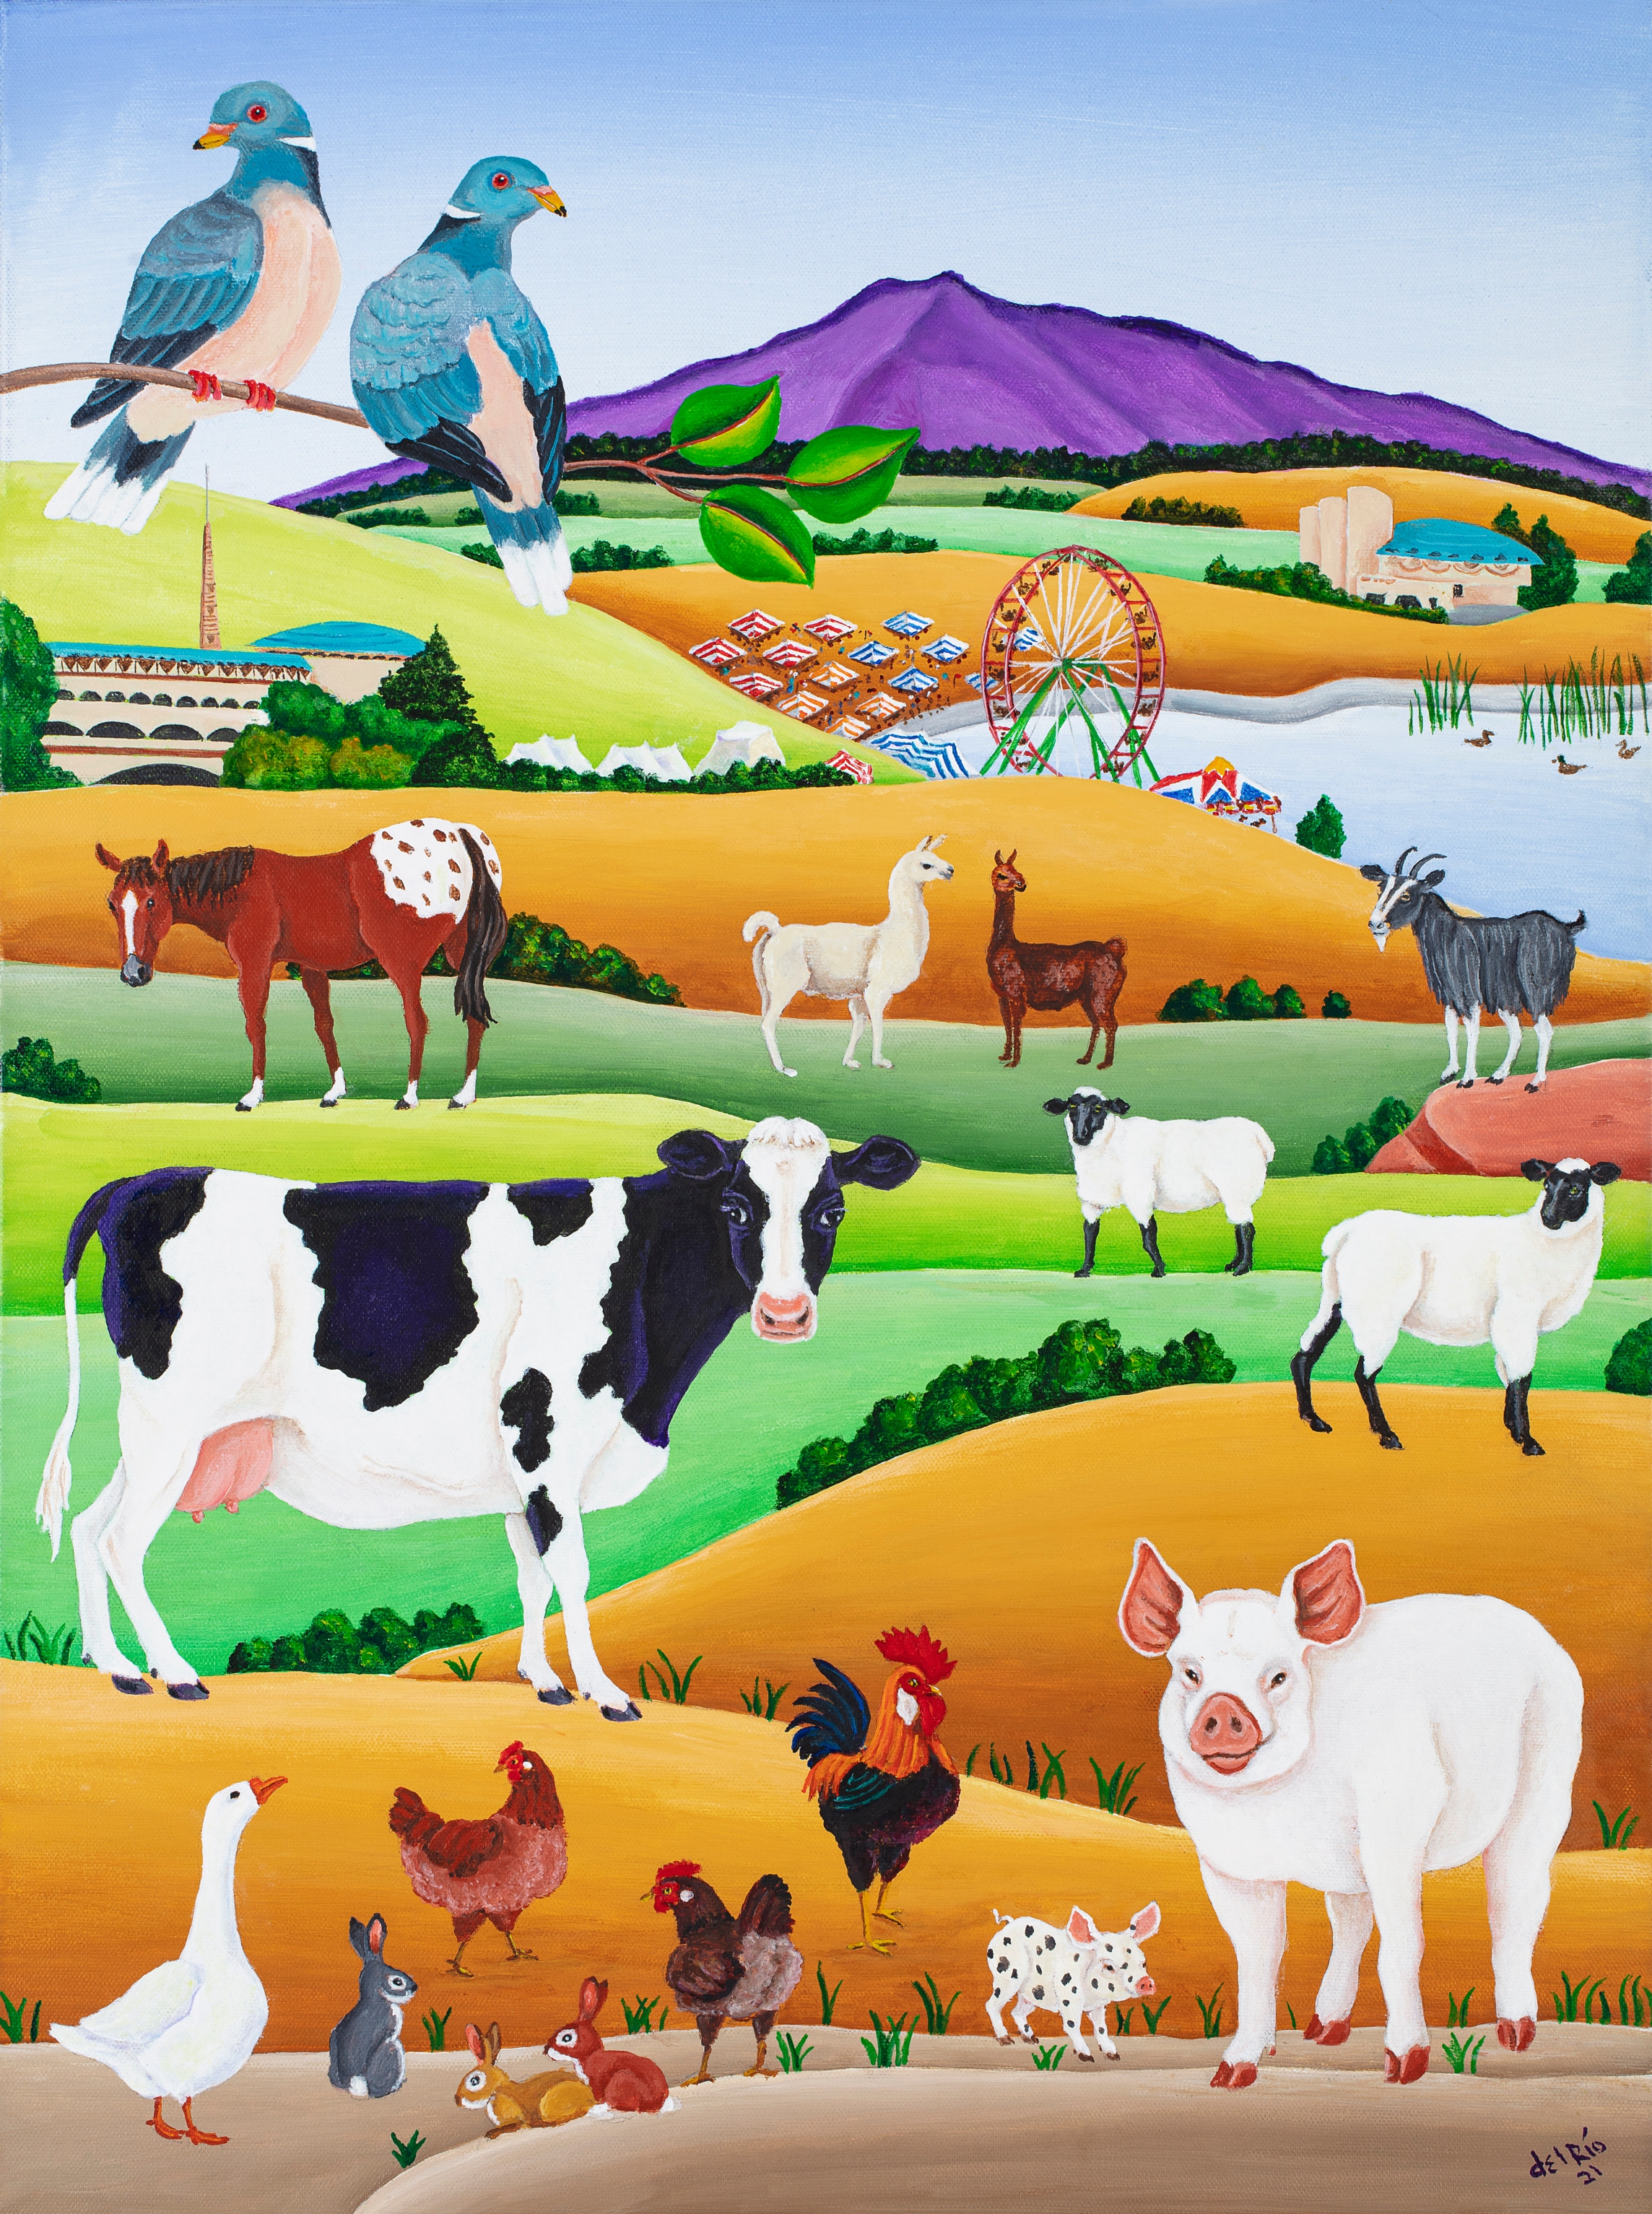 The 2022 Marin County Fair promotional poster by artist Raul Del Rio depicts the Marin landscape, the county fairgrounds, and farm animals.